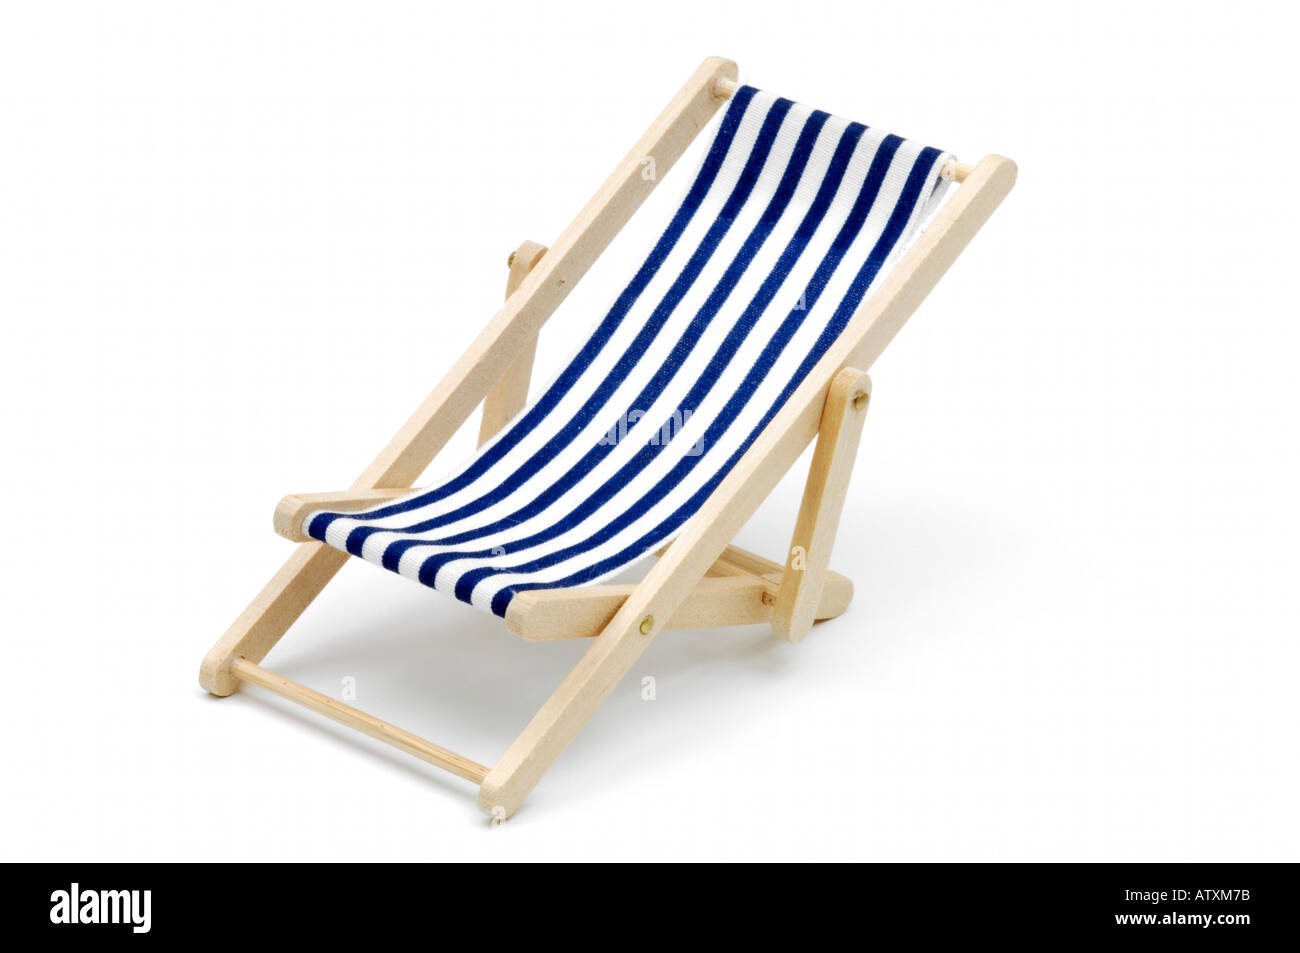 Deck chair on white background Stock Photo